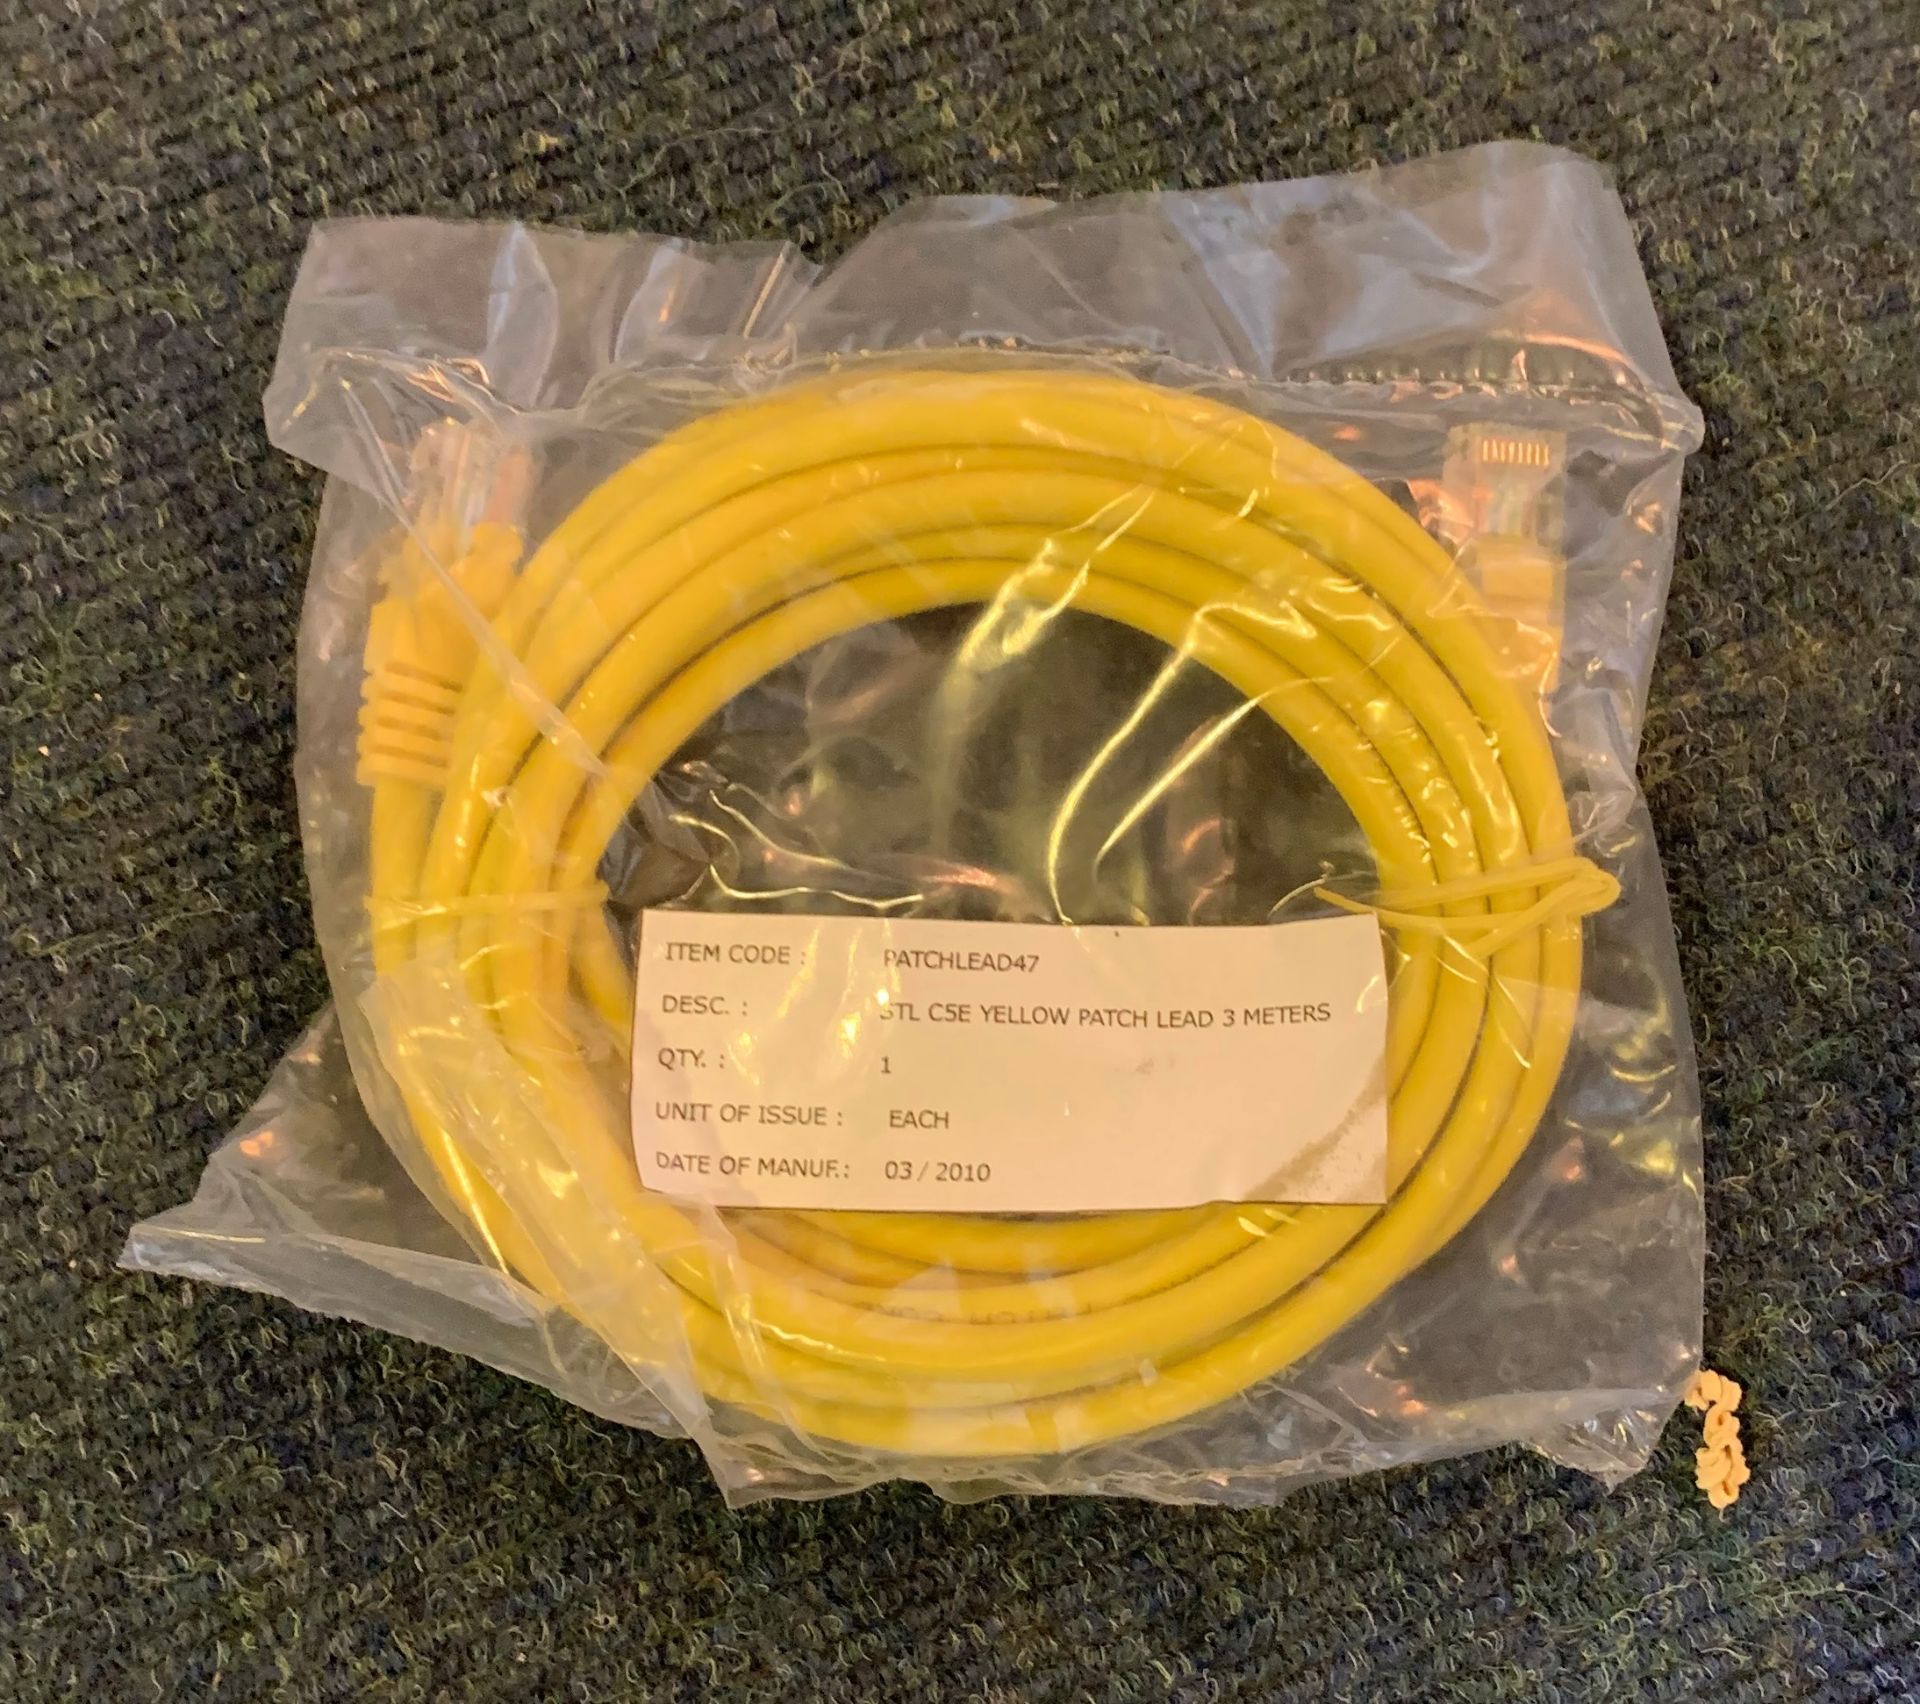 150x Yellow patch lead 3MB RJ45 cable